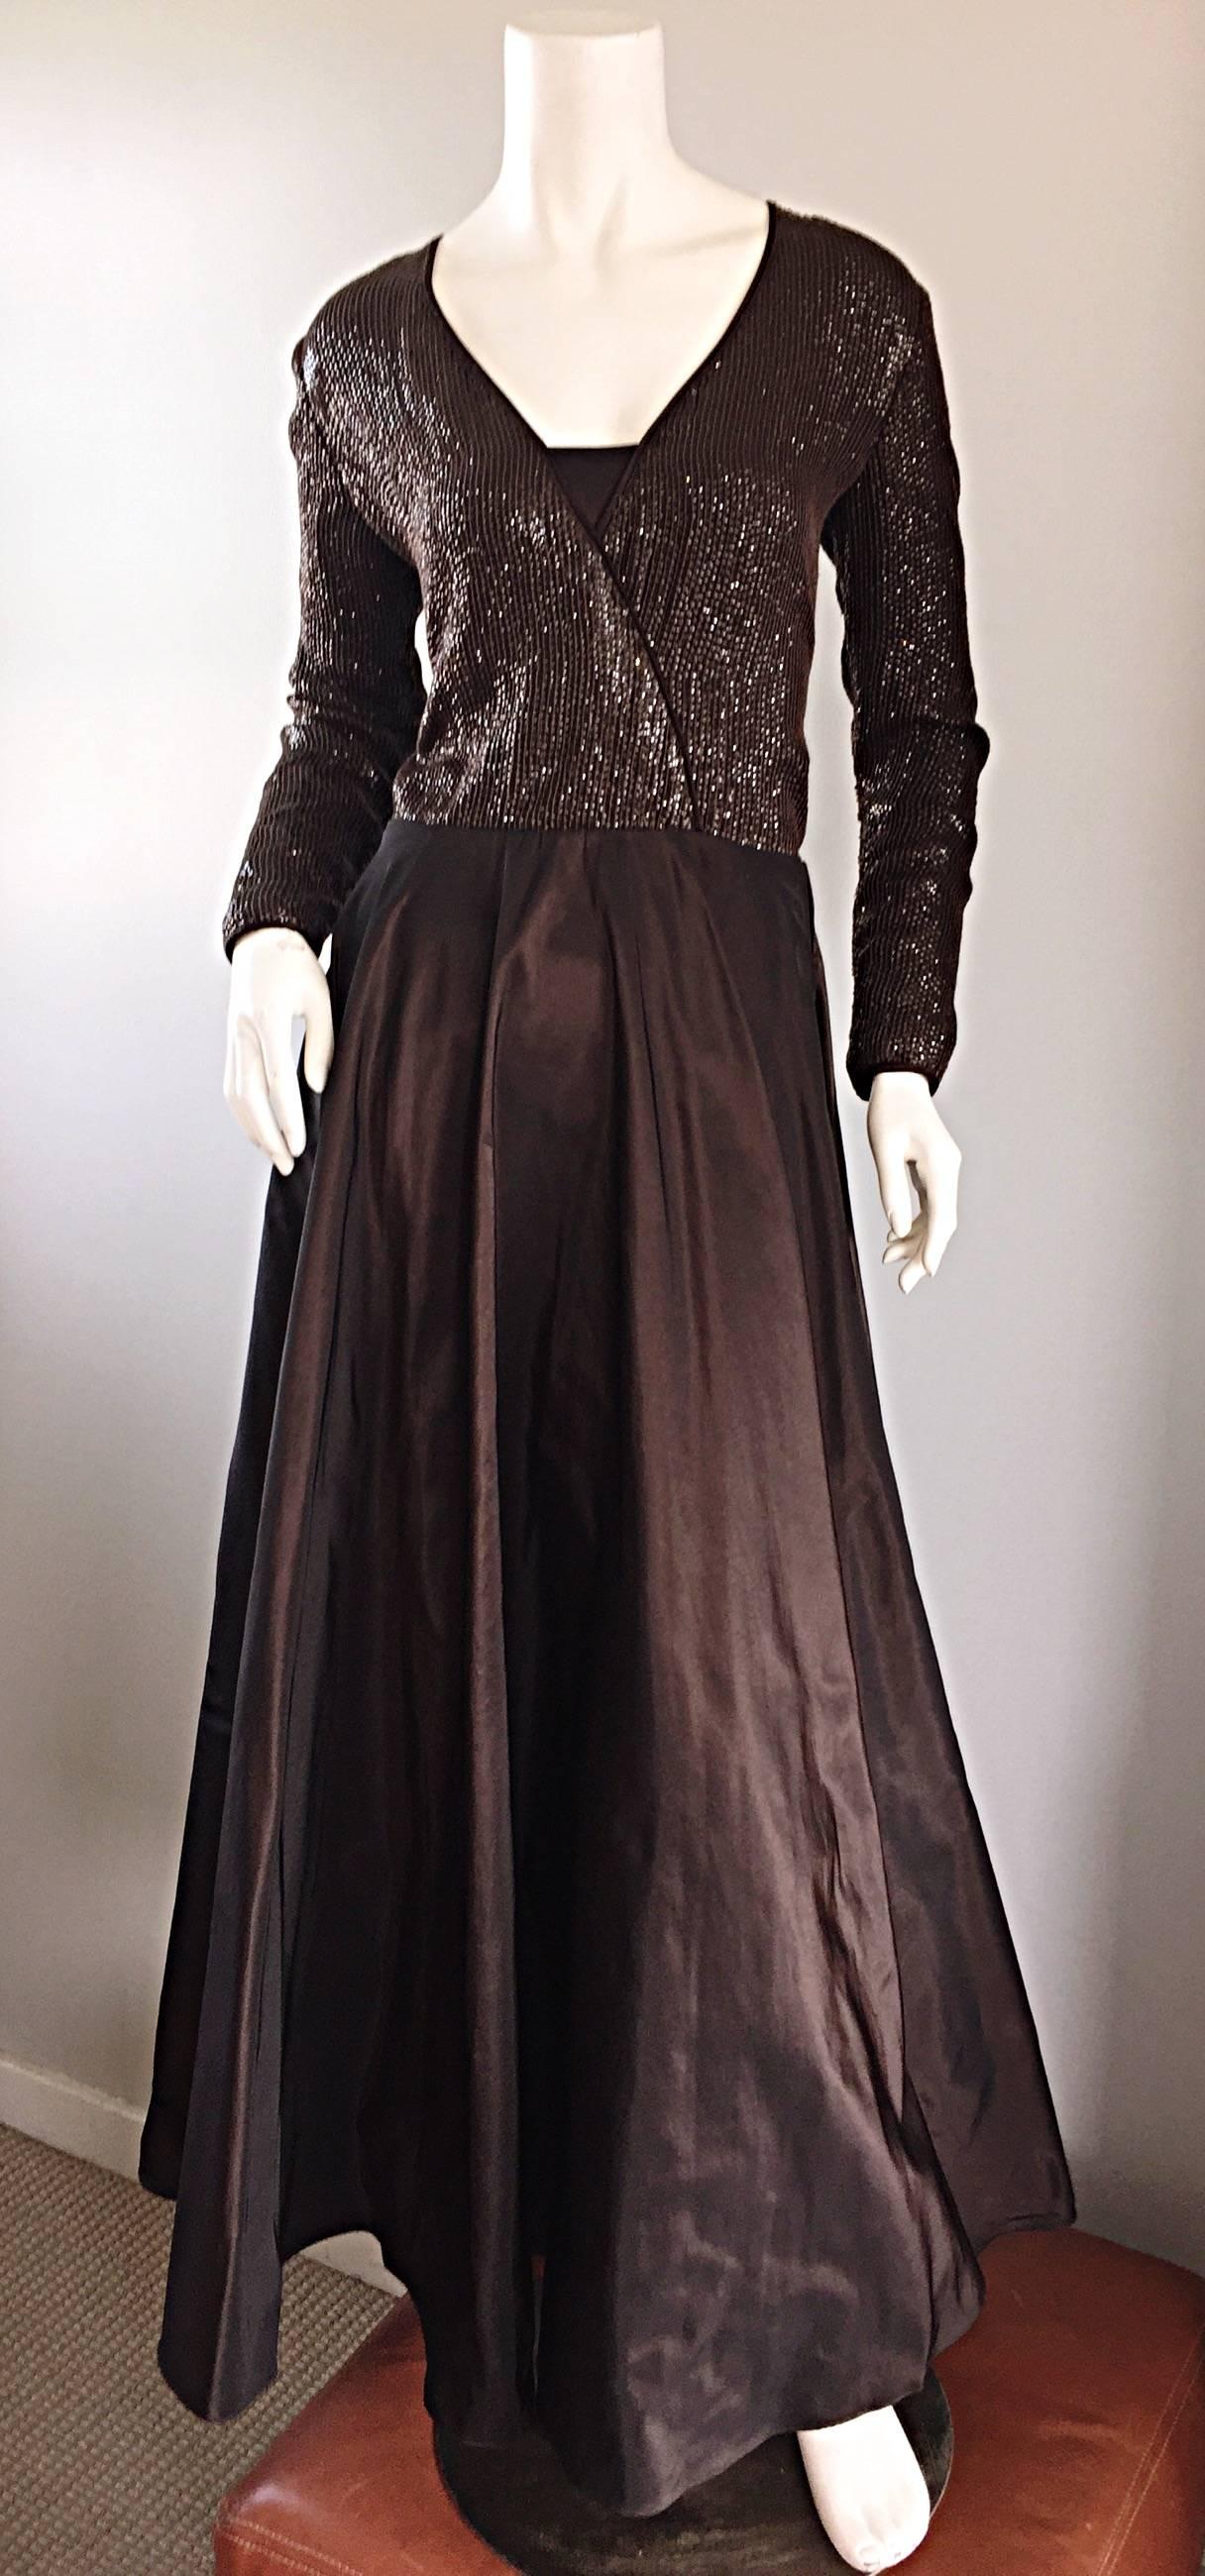 Exquisite vintage 90s PAMELA DENNIS couture, for BERGDORF GOODMAN, chocolate cocoa brown sequined and silk taffeta evening dress! Features all-over hand-sewn small brown sequins throughout the front and back of the bodice. Full taffeta skirt with